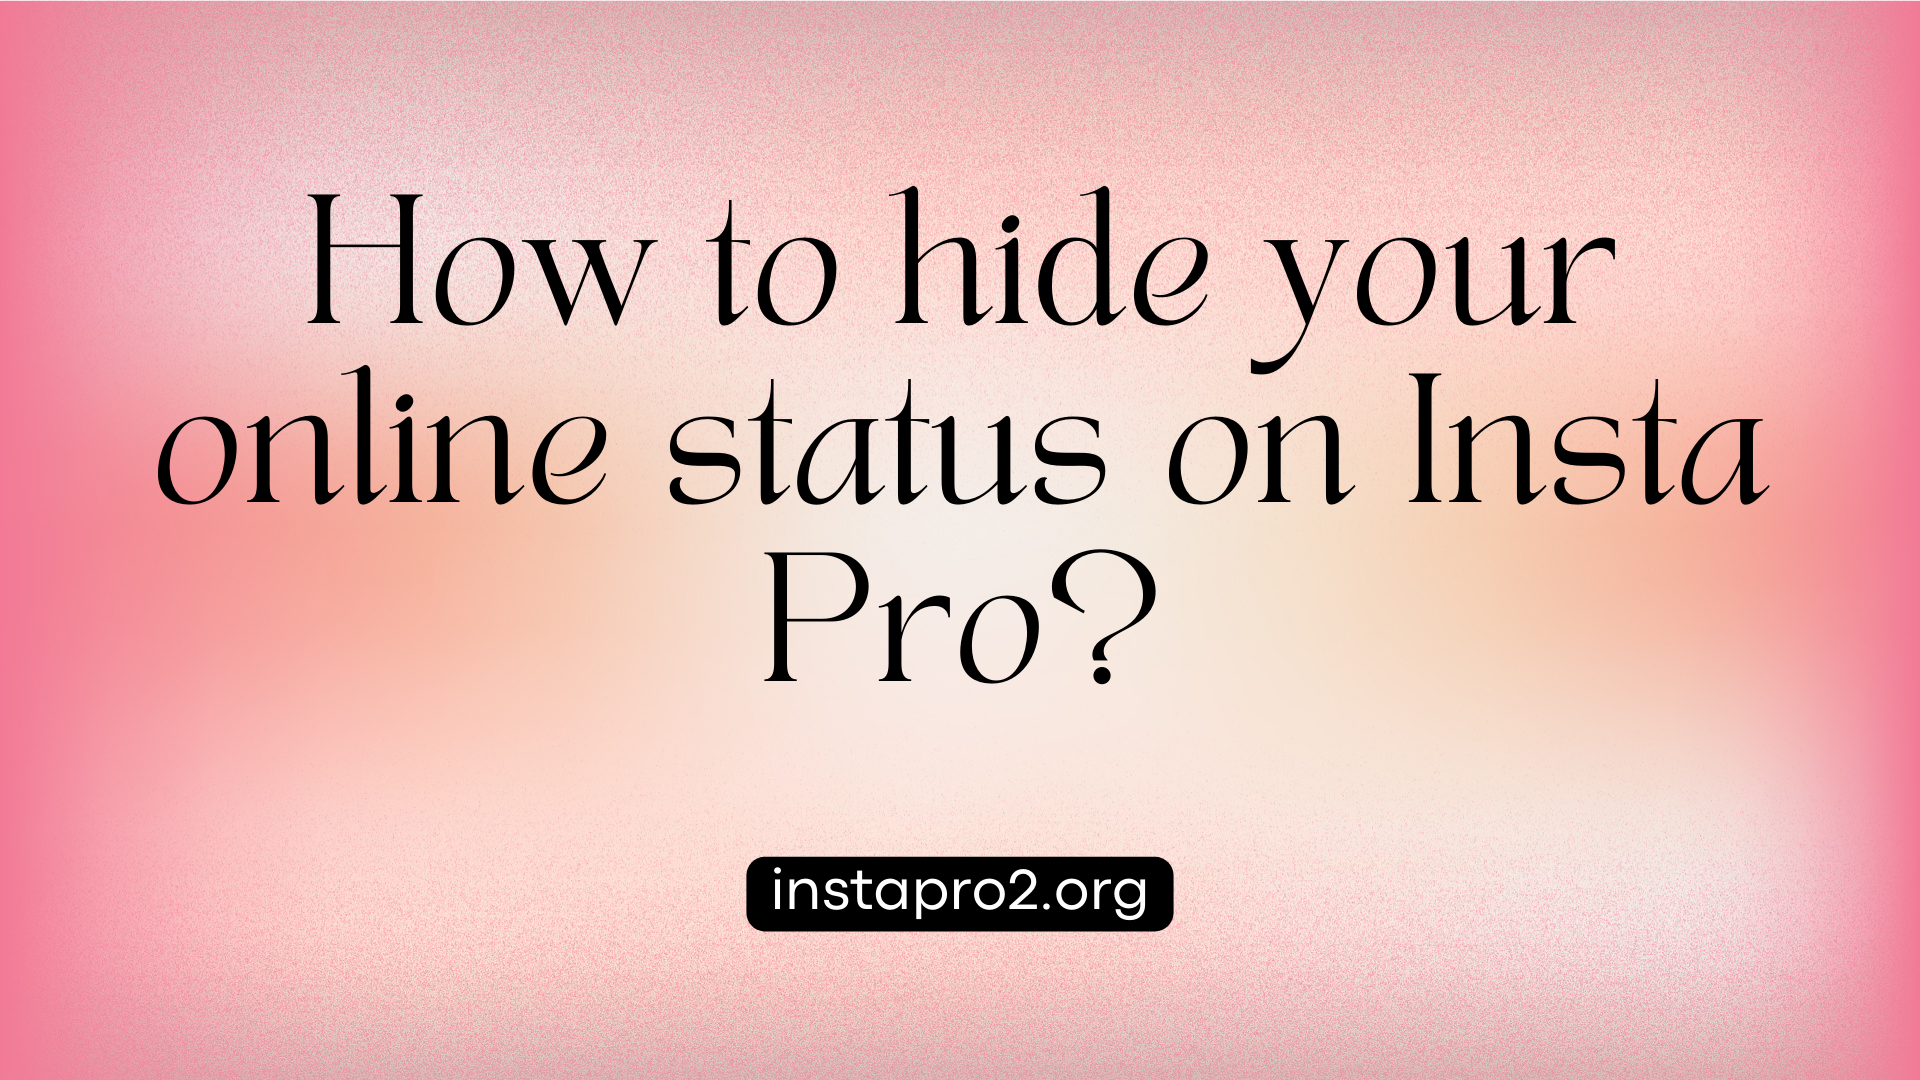 How to hide your online status on Insta Pro?